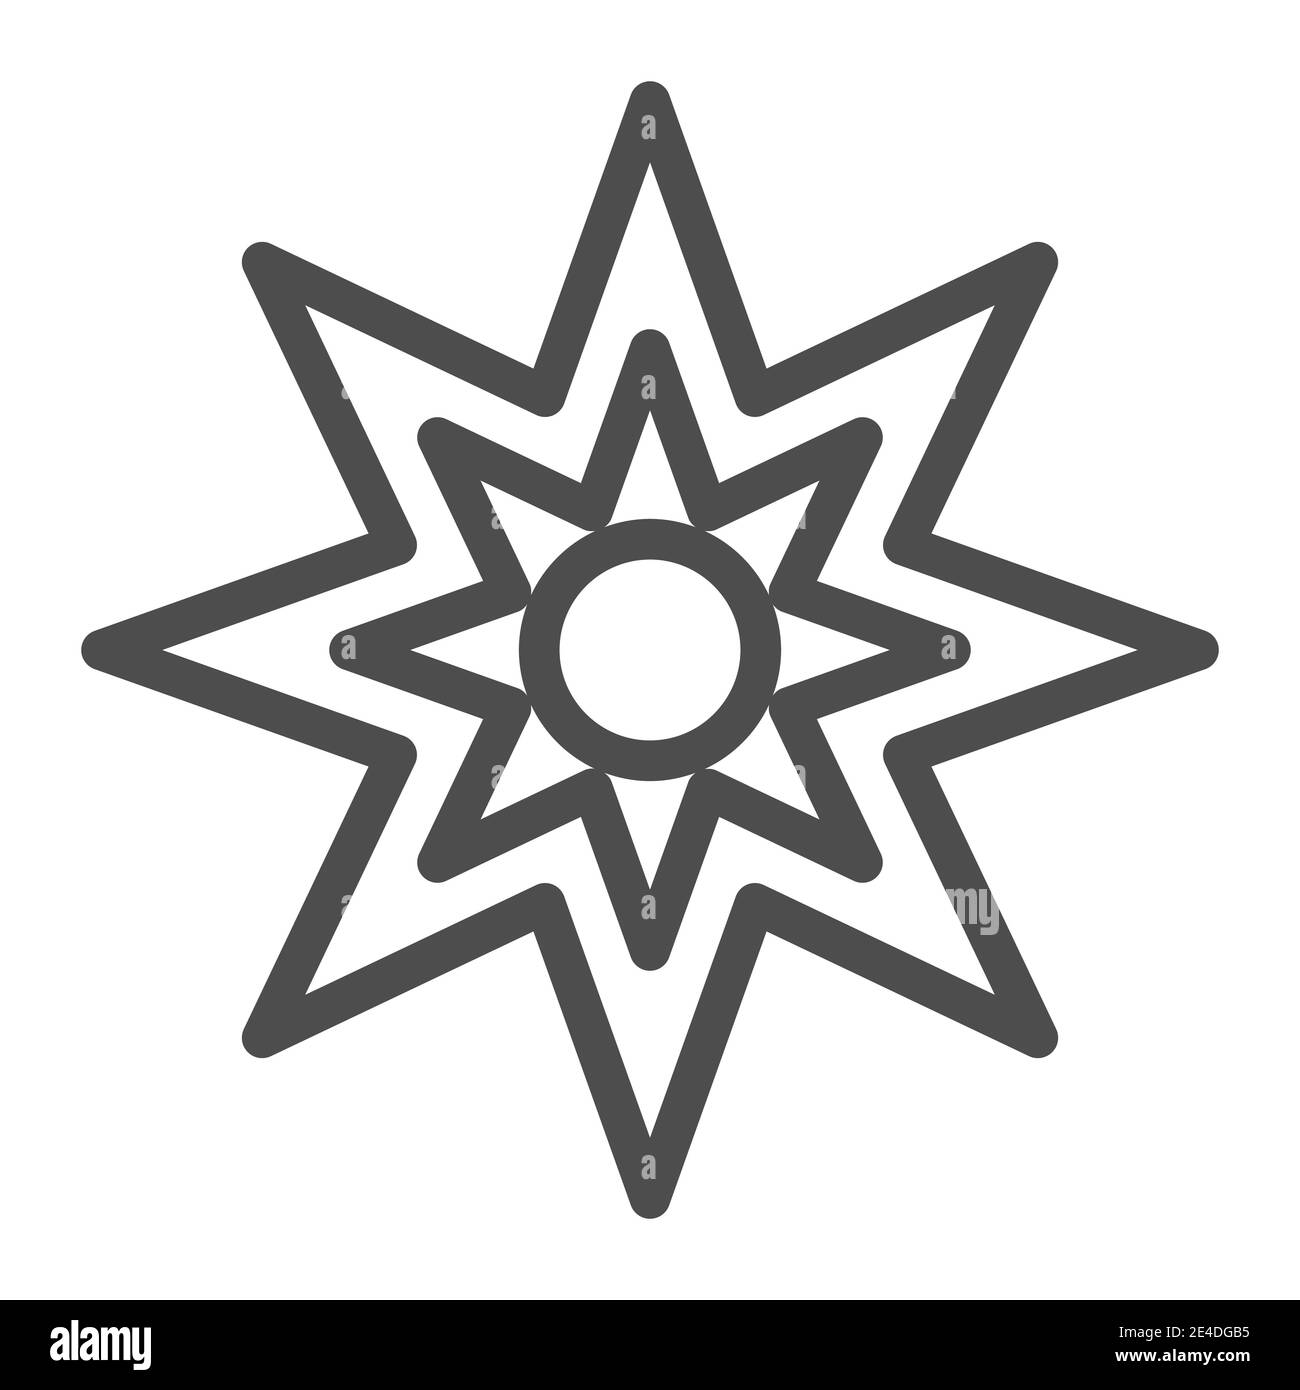 10 point star clipart image